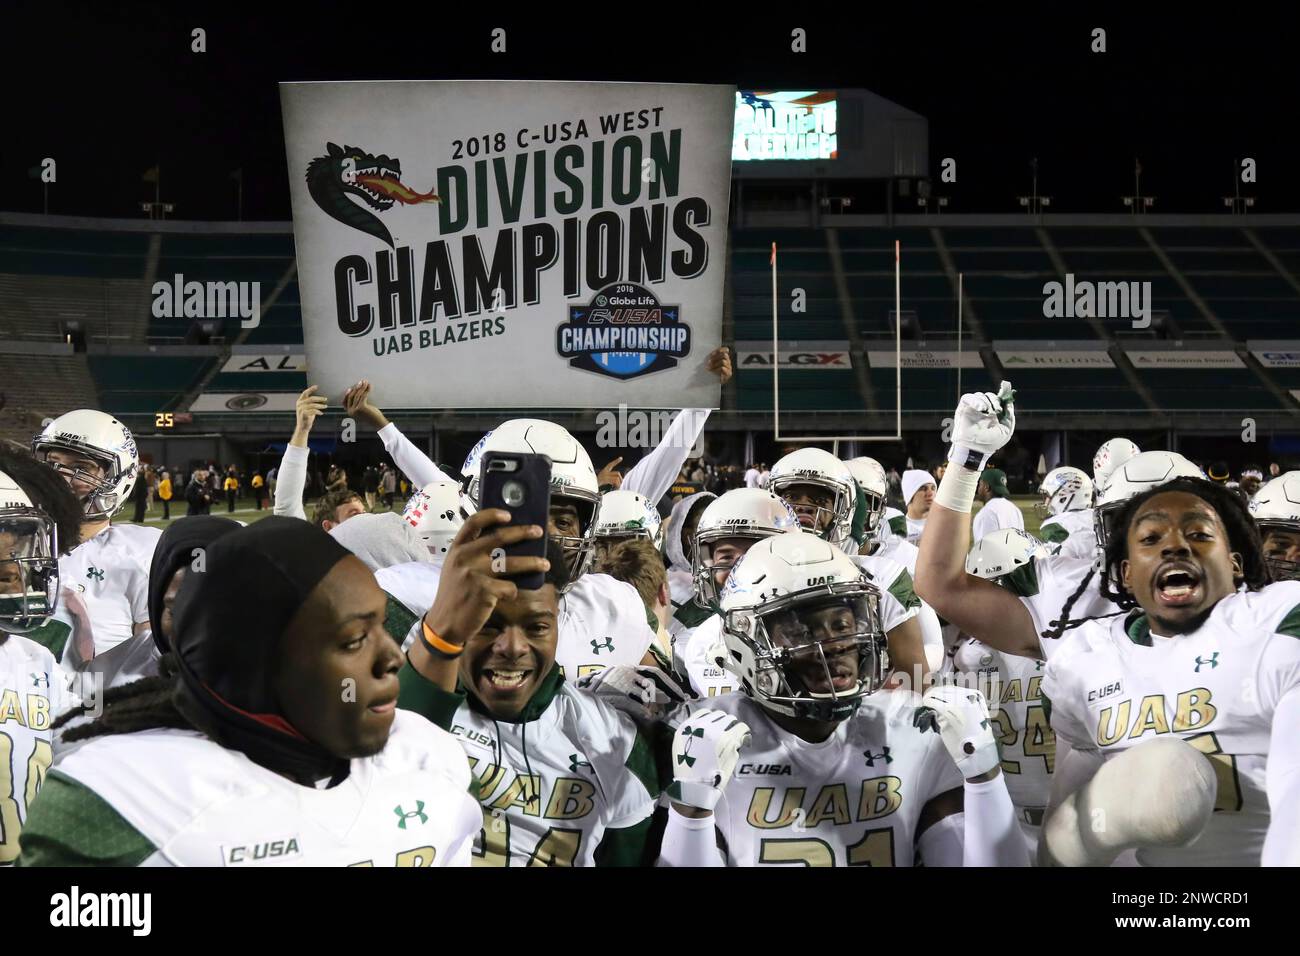 https://c8.alamy.com/comp/2NWCRD1/birmingham-al-november-10-uab-blazers-hold-up-a-sign-after-winning-the-c-usa-west-division-after-the-game-between-the-uab-blazers-and-the-southern-miss-golden-eagles-at-legion-field-in-birmingham-alabama-photo-by-michael-wadeicon-sportswire-icon-sportswire-via-ap-images-2NWCRD1.jpg